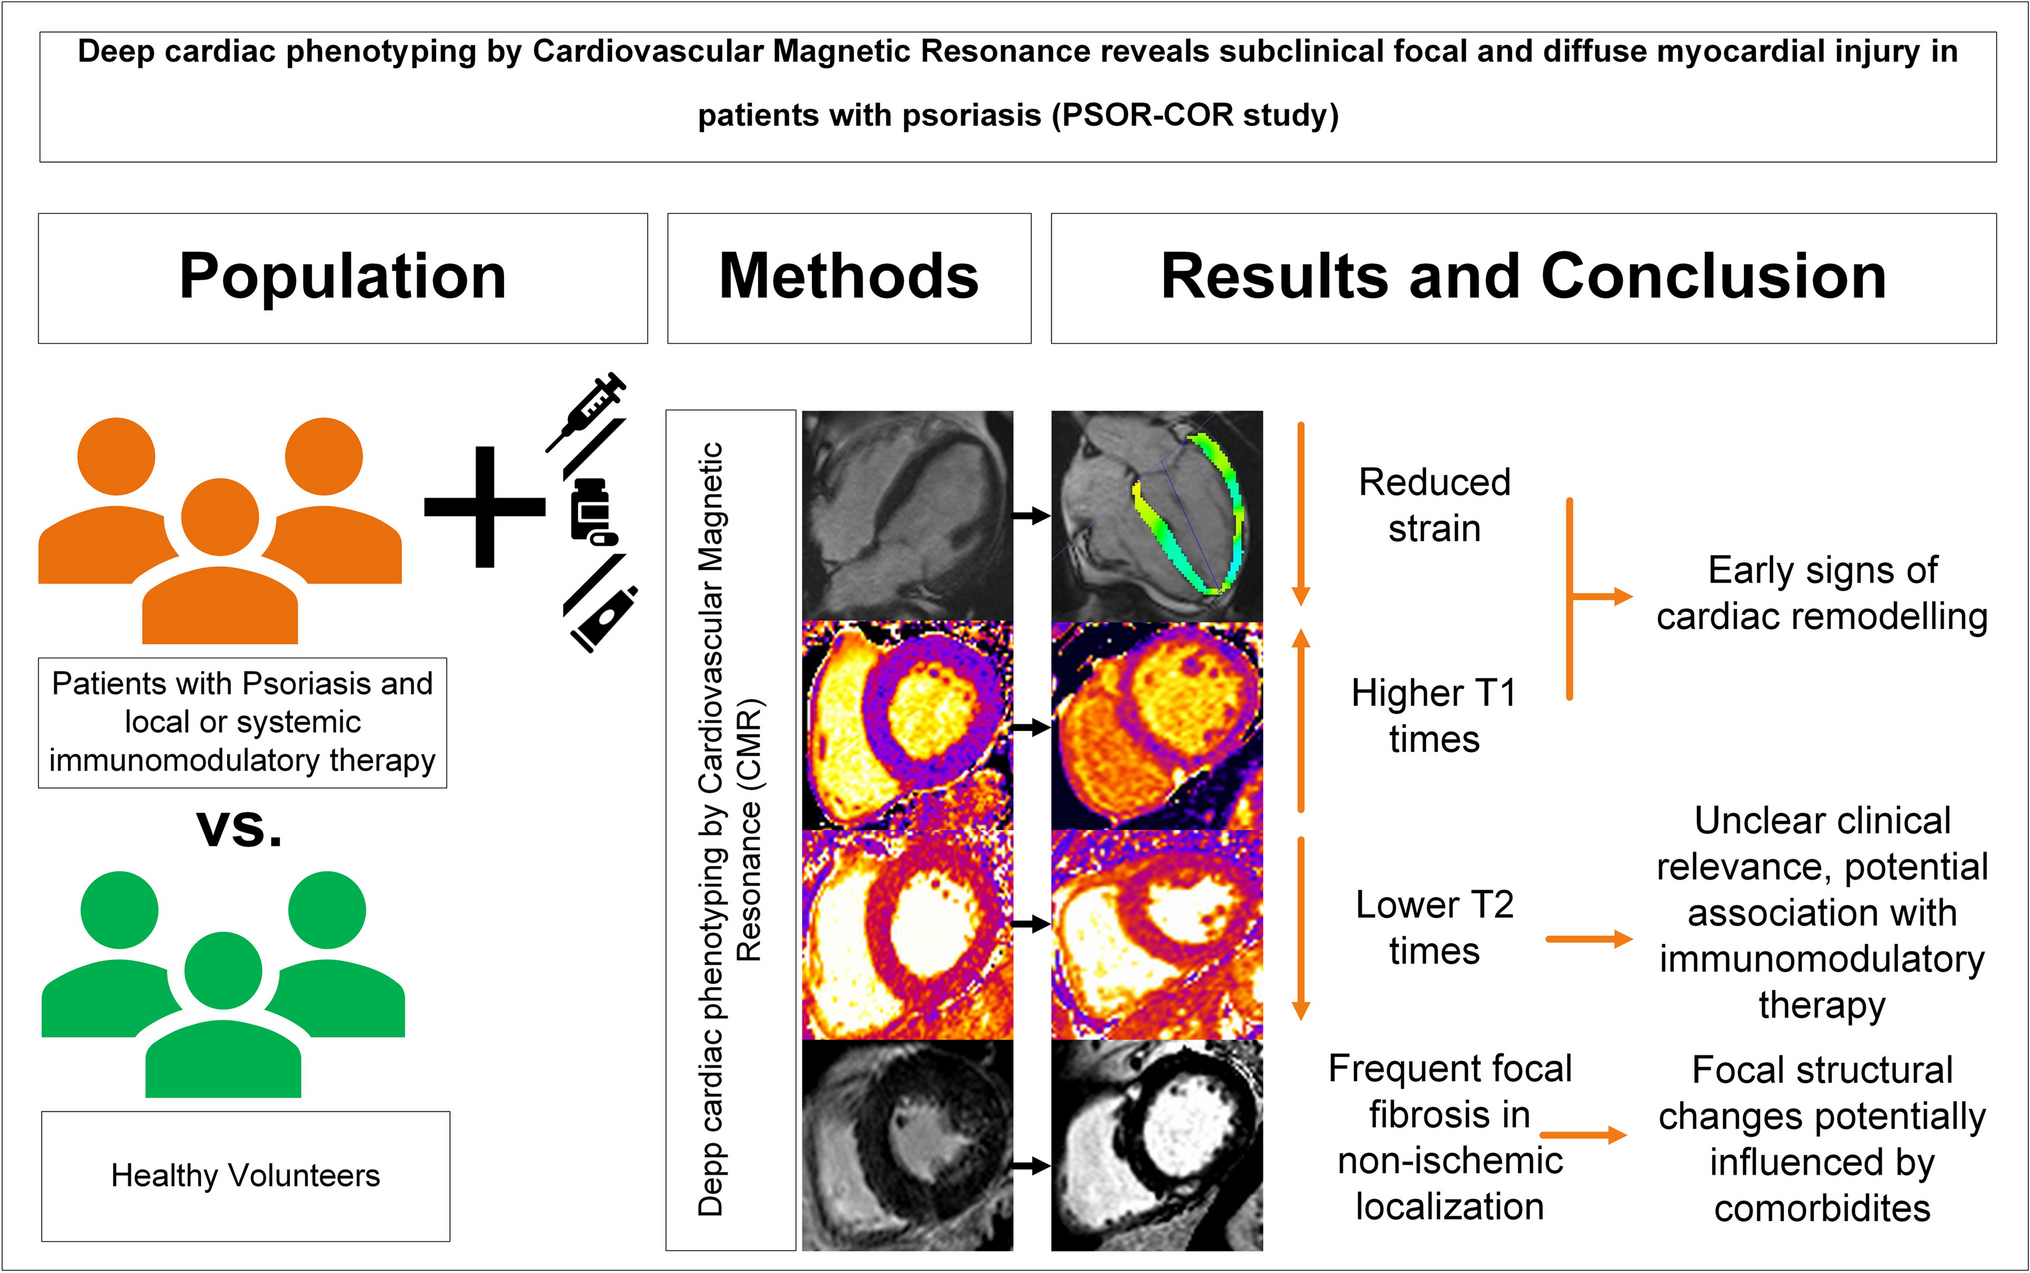 Deep cardiac phenotyping by cardiovascular magnetic resonance reveals subclinical focal and diffuse myocardial injury in patients with psoriasis (PSOR-COR study)